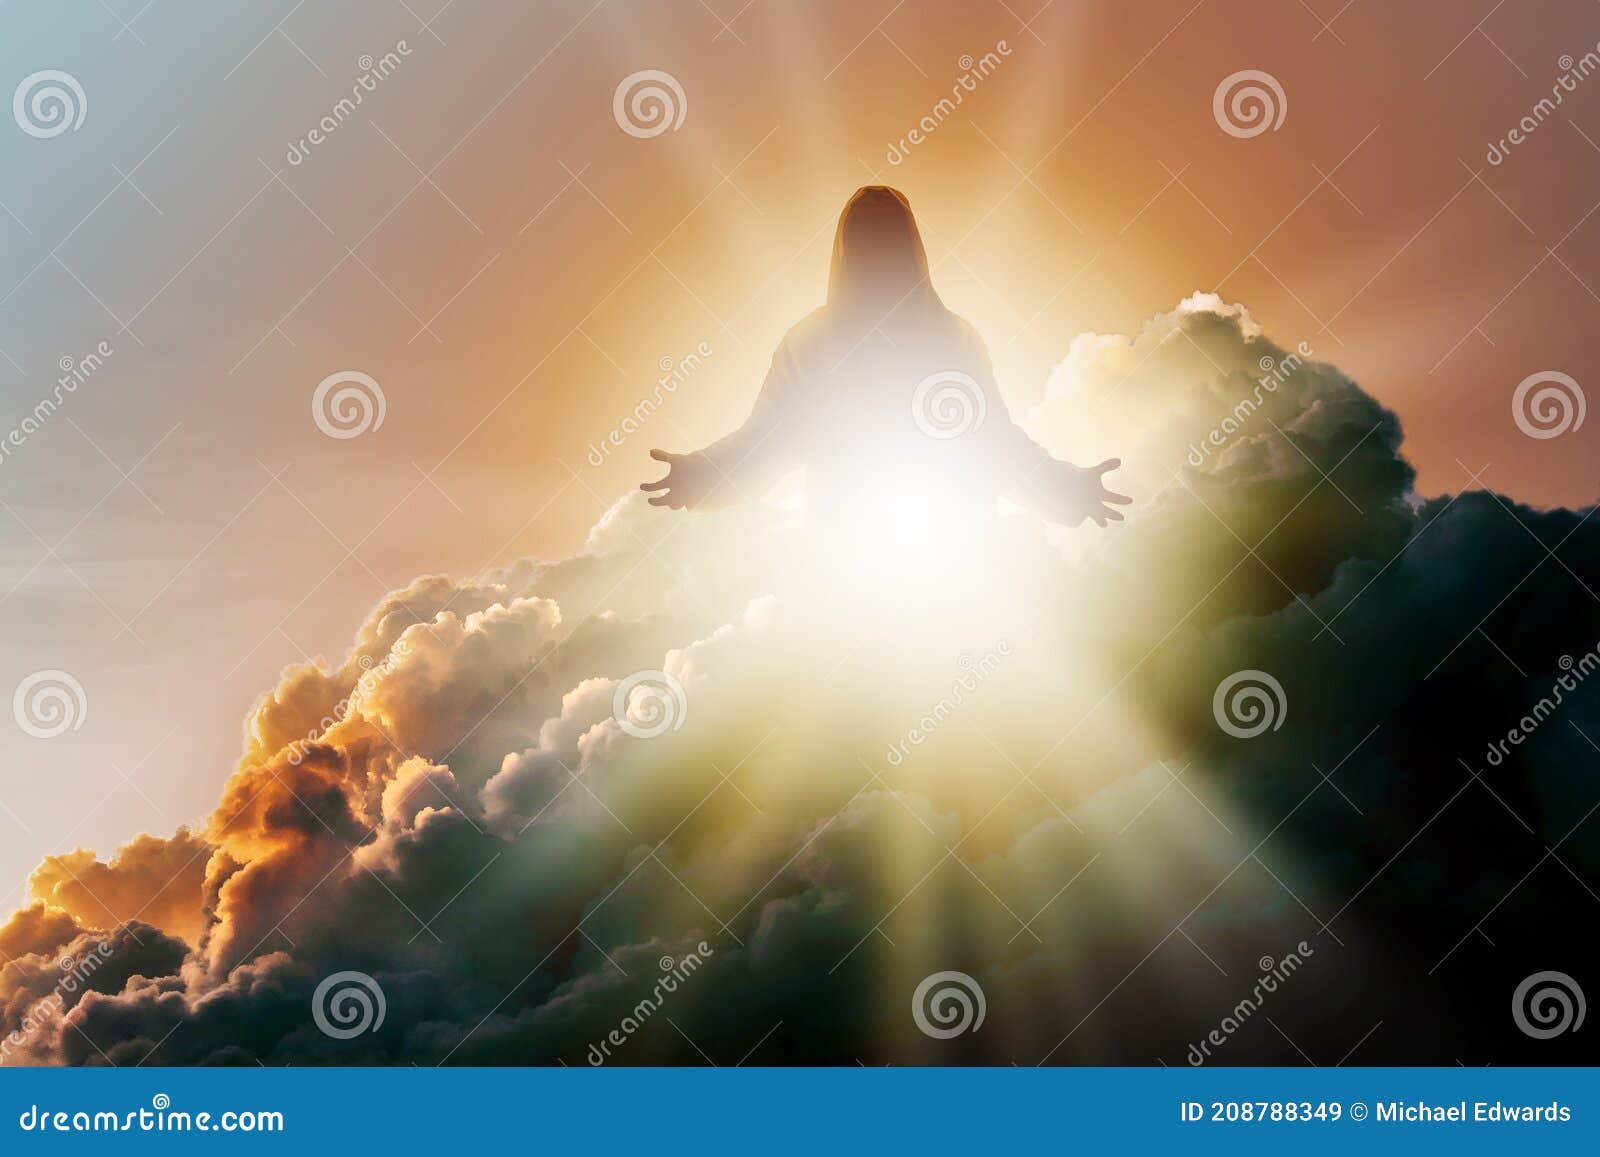 Silhouette of Jesus Christ in Heaven, Up in the Clouds Against a ...